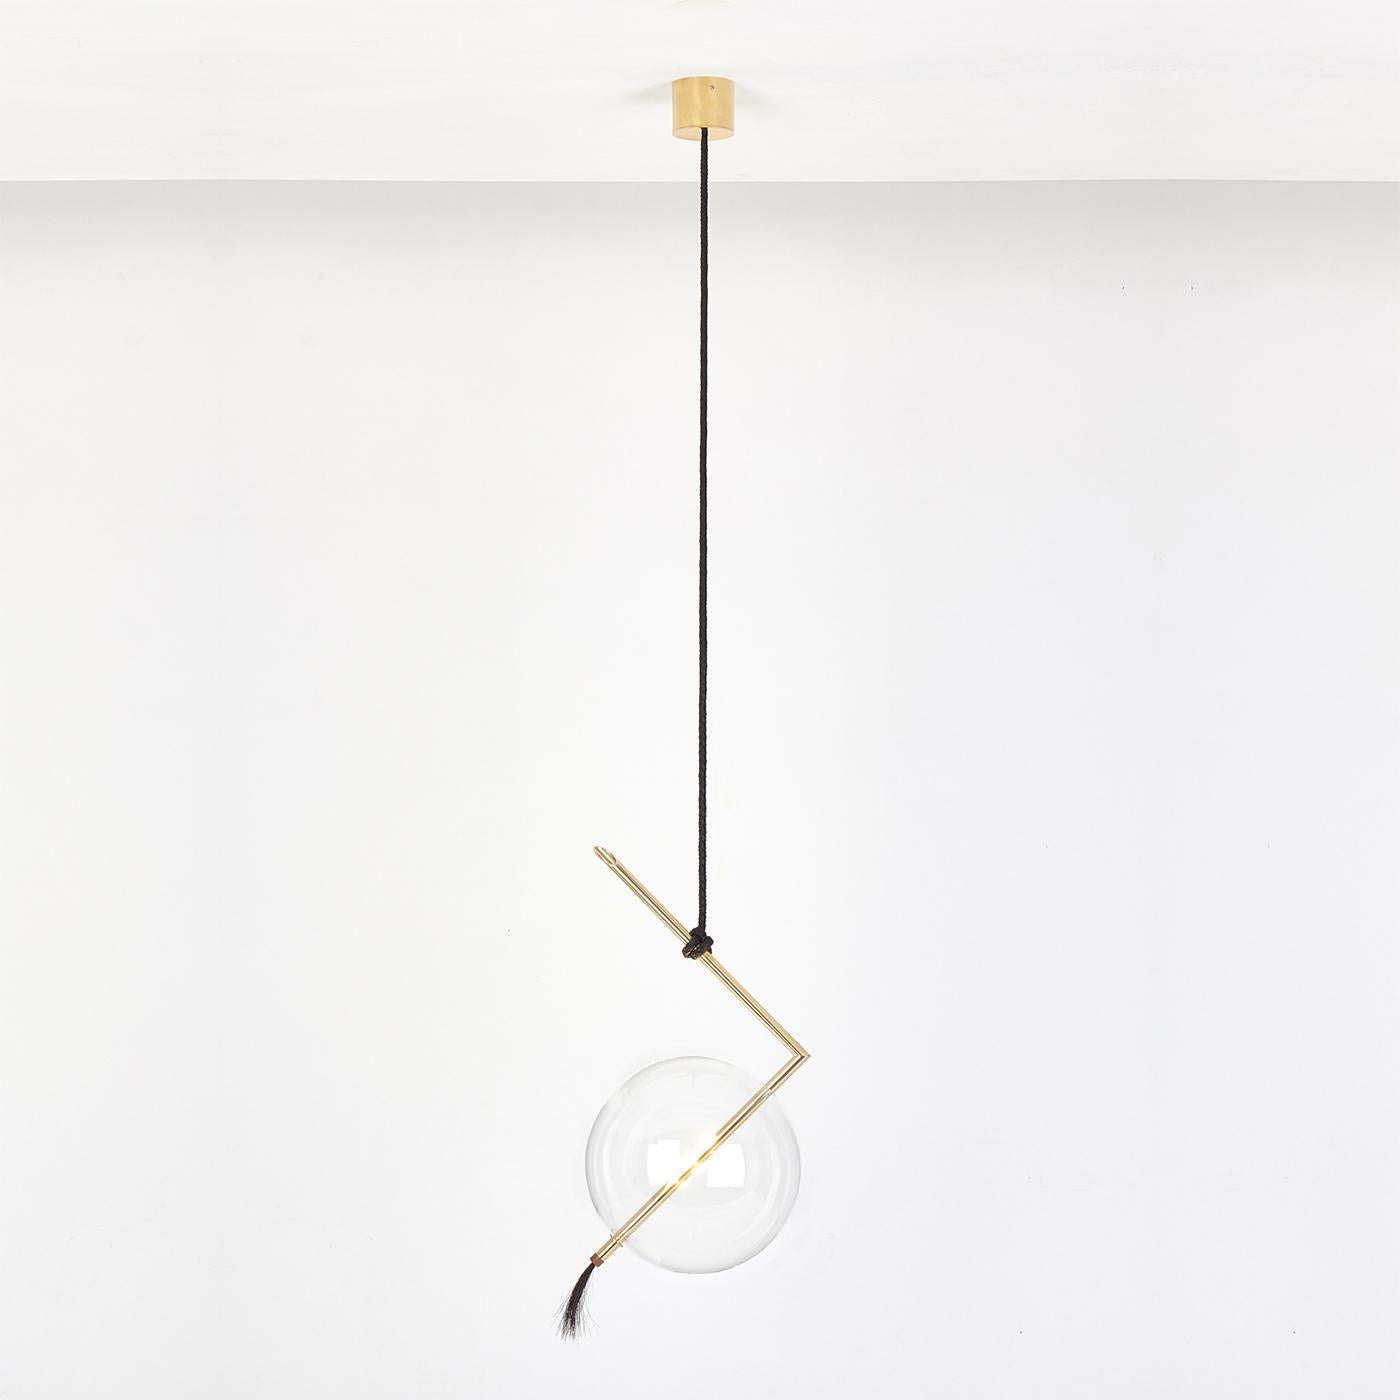 Arranged in multiples at different heights in a minimalist living room or dining room, this refined light pendant is a radiant, sculptural statement piece. The unconventional silhouette is made of a machined brass tube bent at a right angle, the top